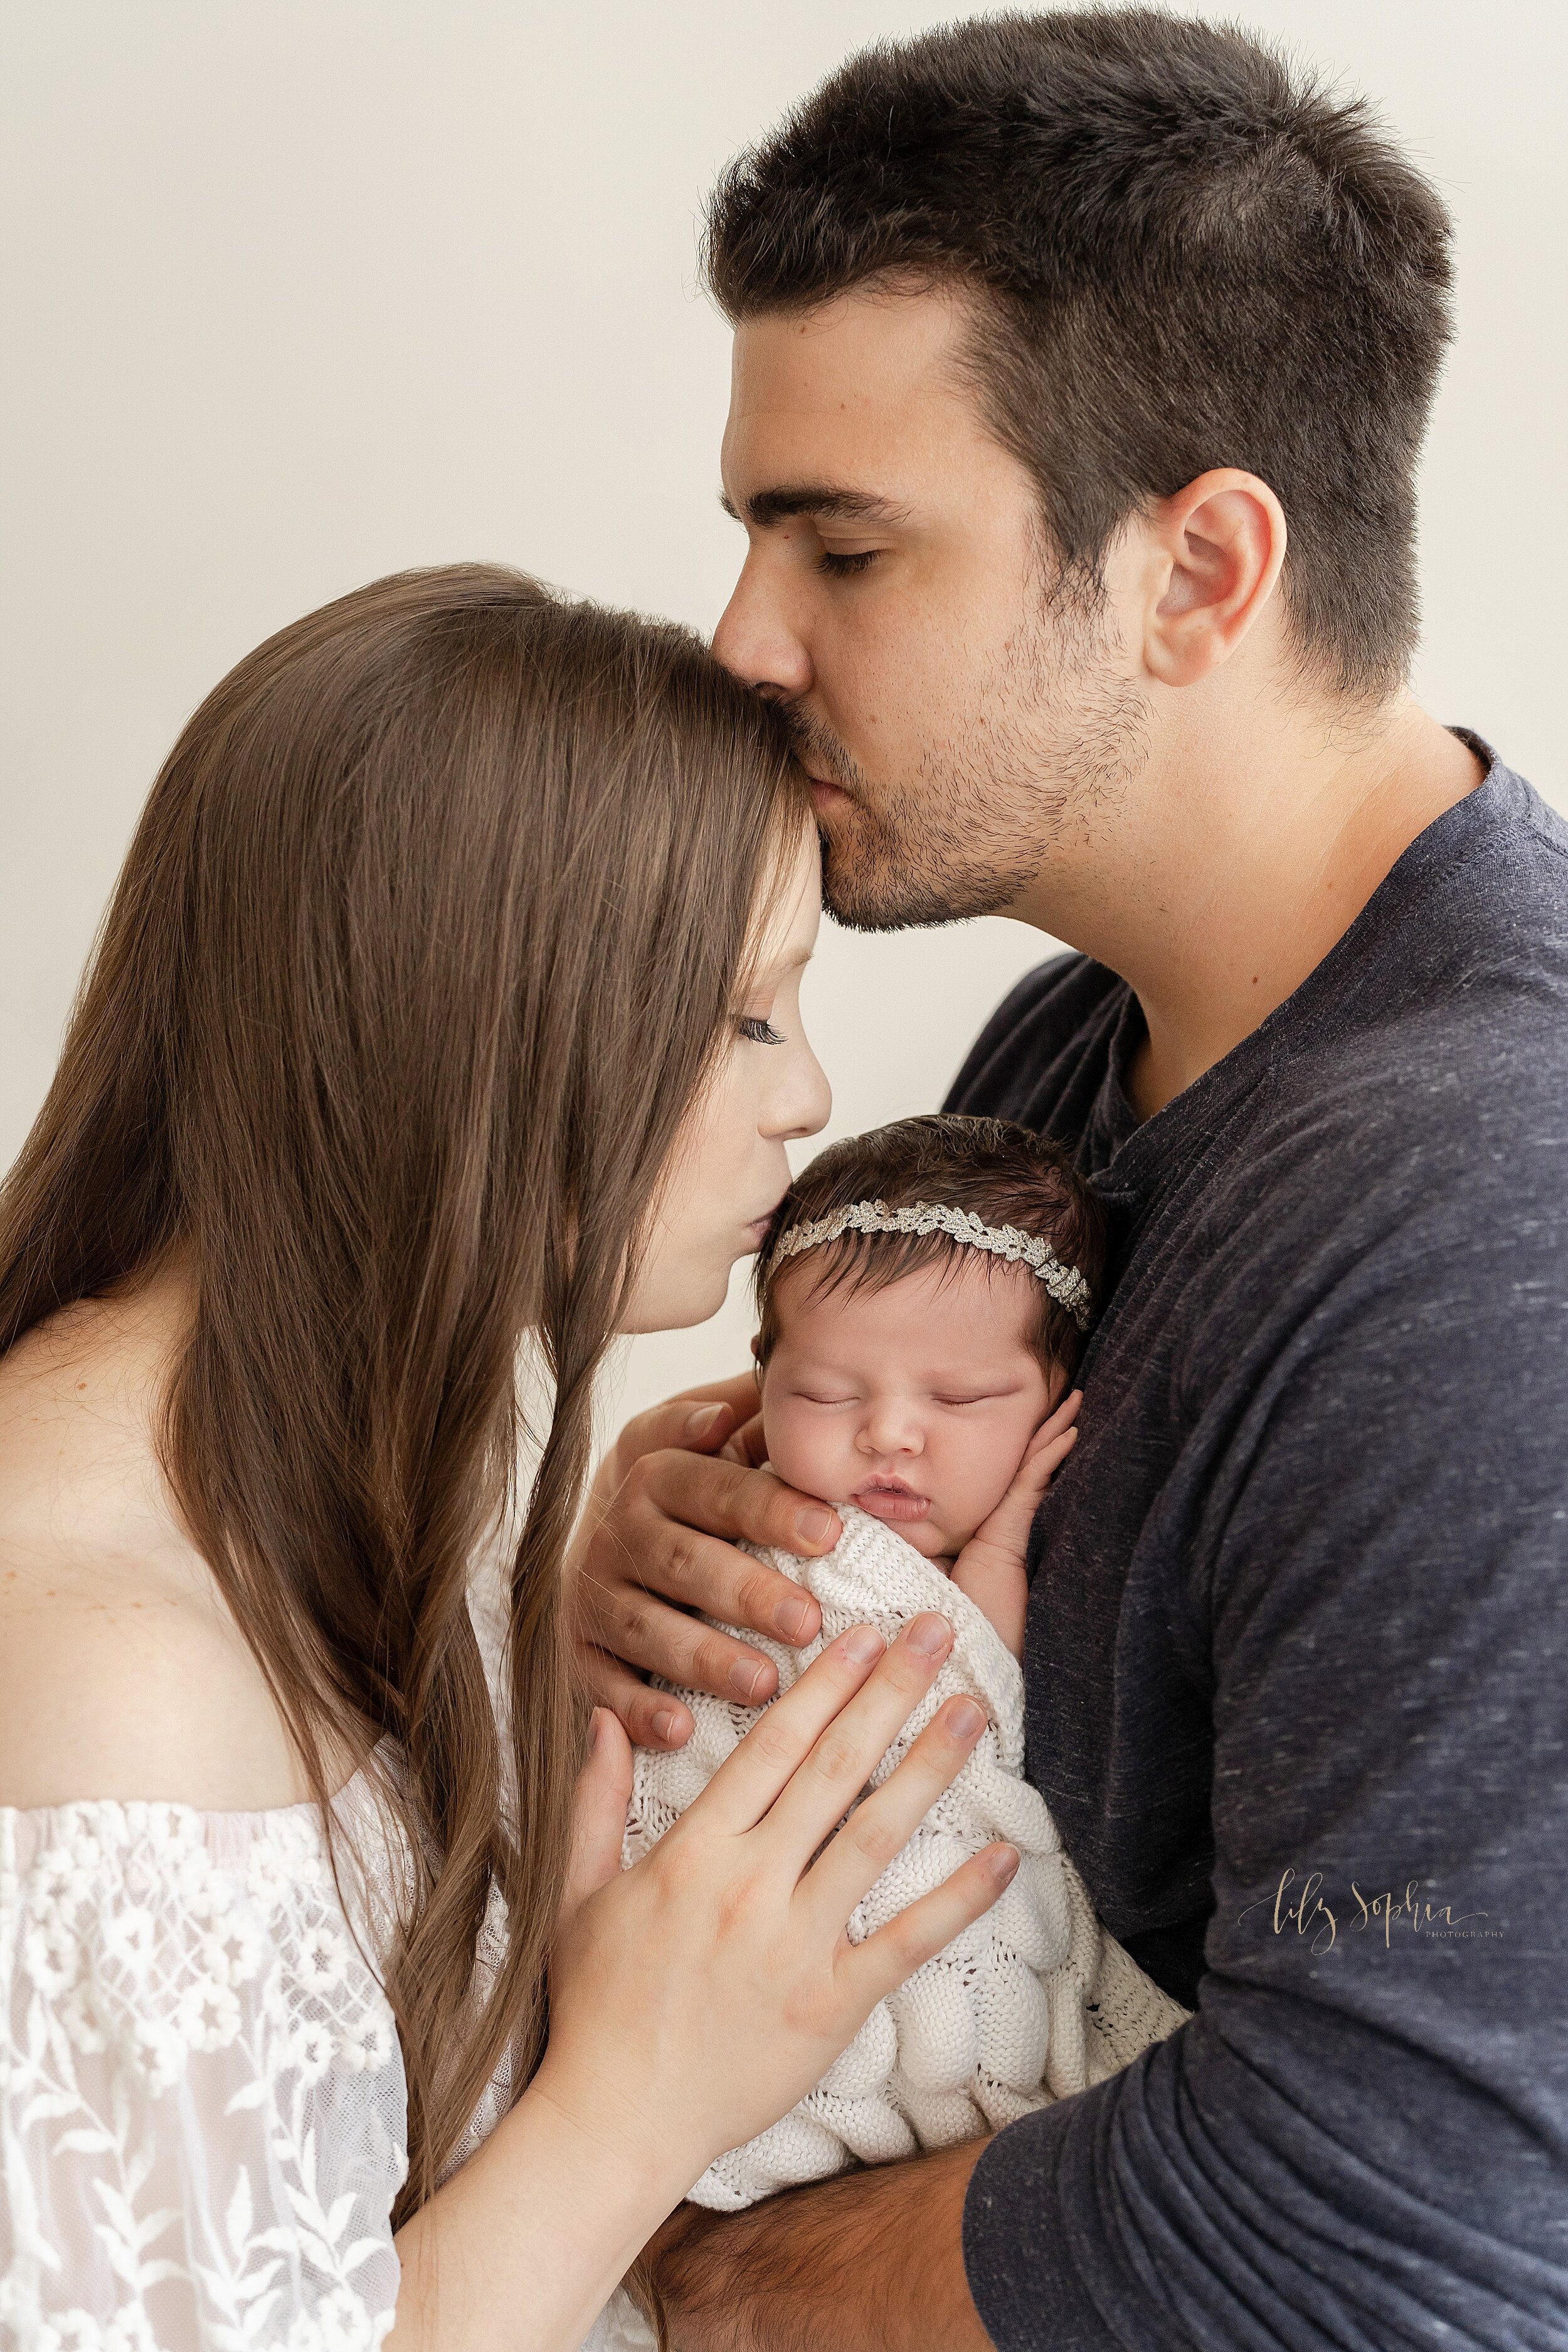  Family newborn photo of a father holding his sleeping newborn daughter against his chest as the mother faces her husband and kisses the side of her daughter’s head while dad kisses his wife’s forehead demonstrating the love in this family taken in a